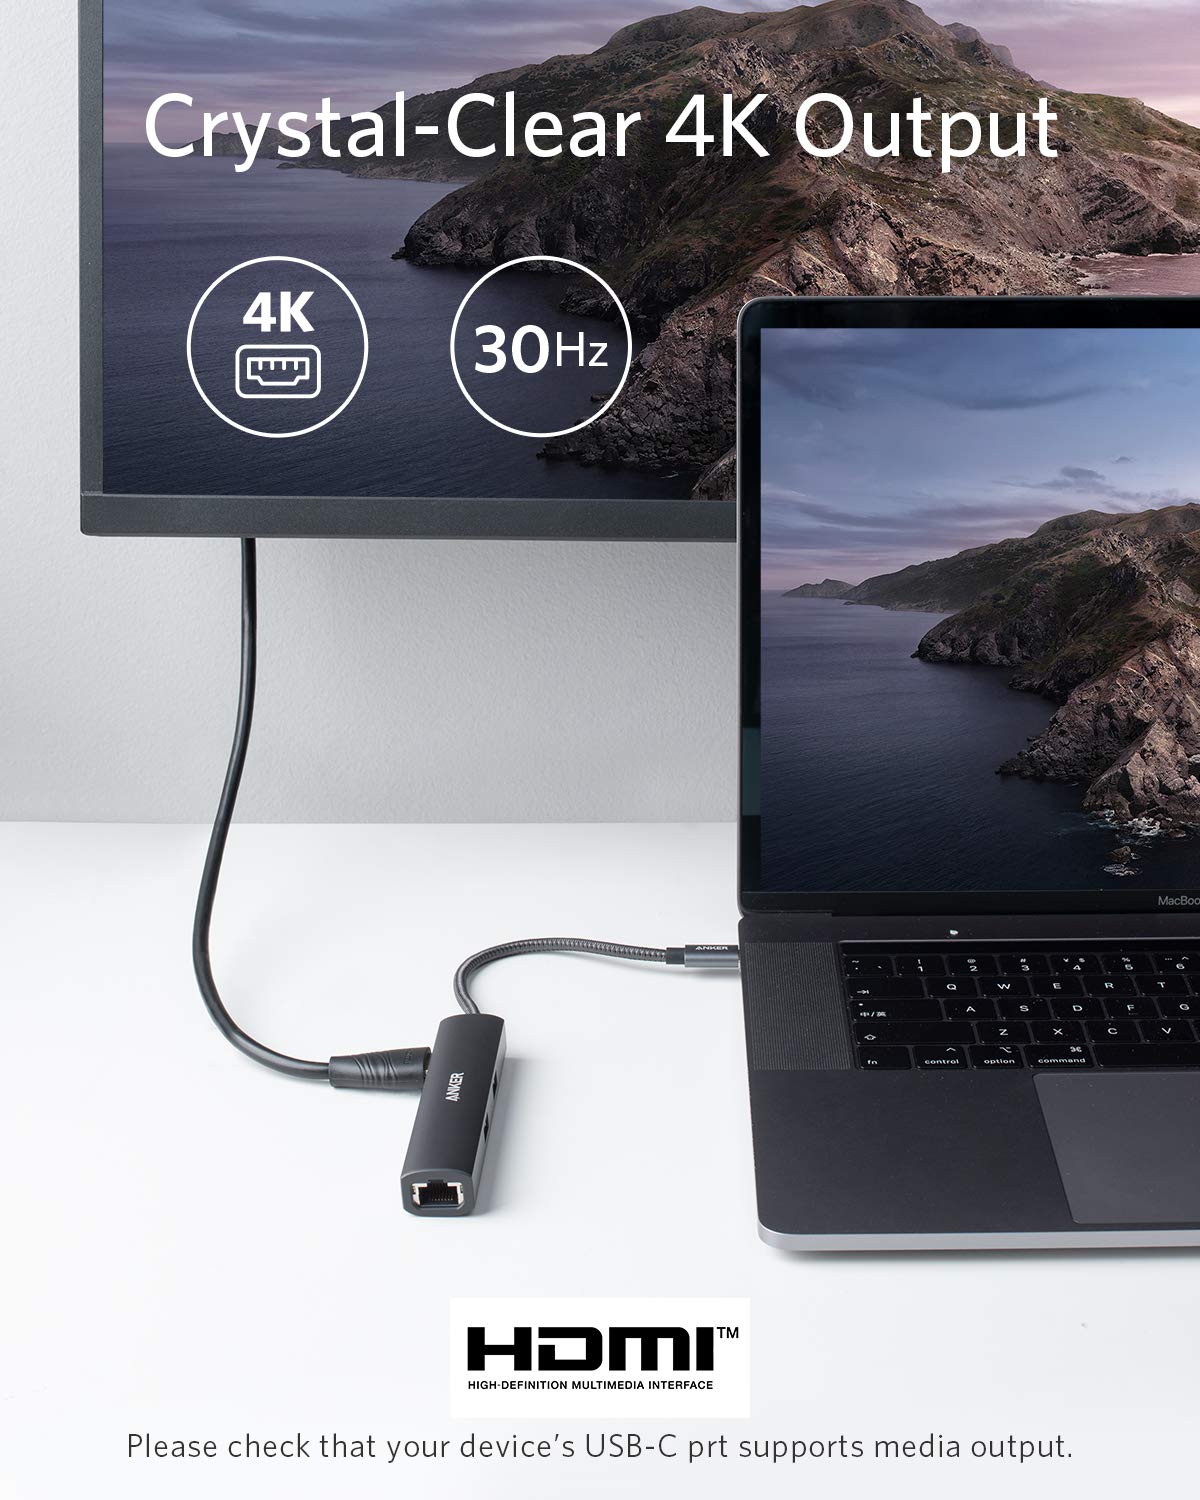 Anker Hub Adapter, 5-in-1 Adapter with 4K USB C to HDMI, Ethernet Port, 3 USB 3.0 Ports, for MacBook Pro, iPad Pro, XPS, Pixelbook, and More